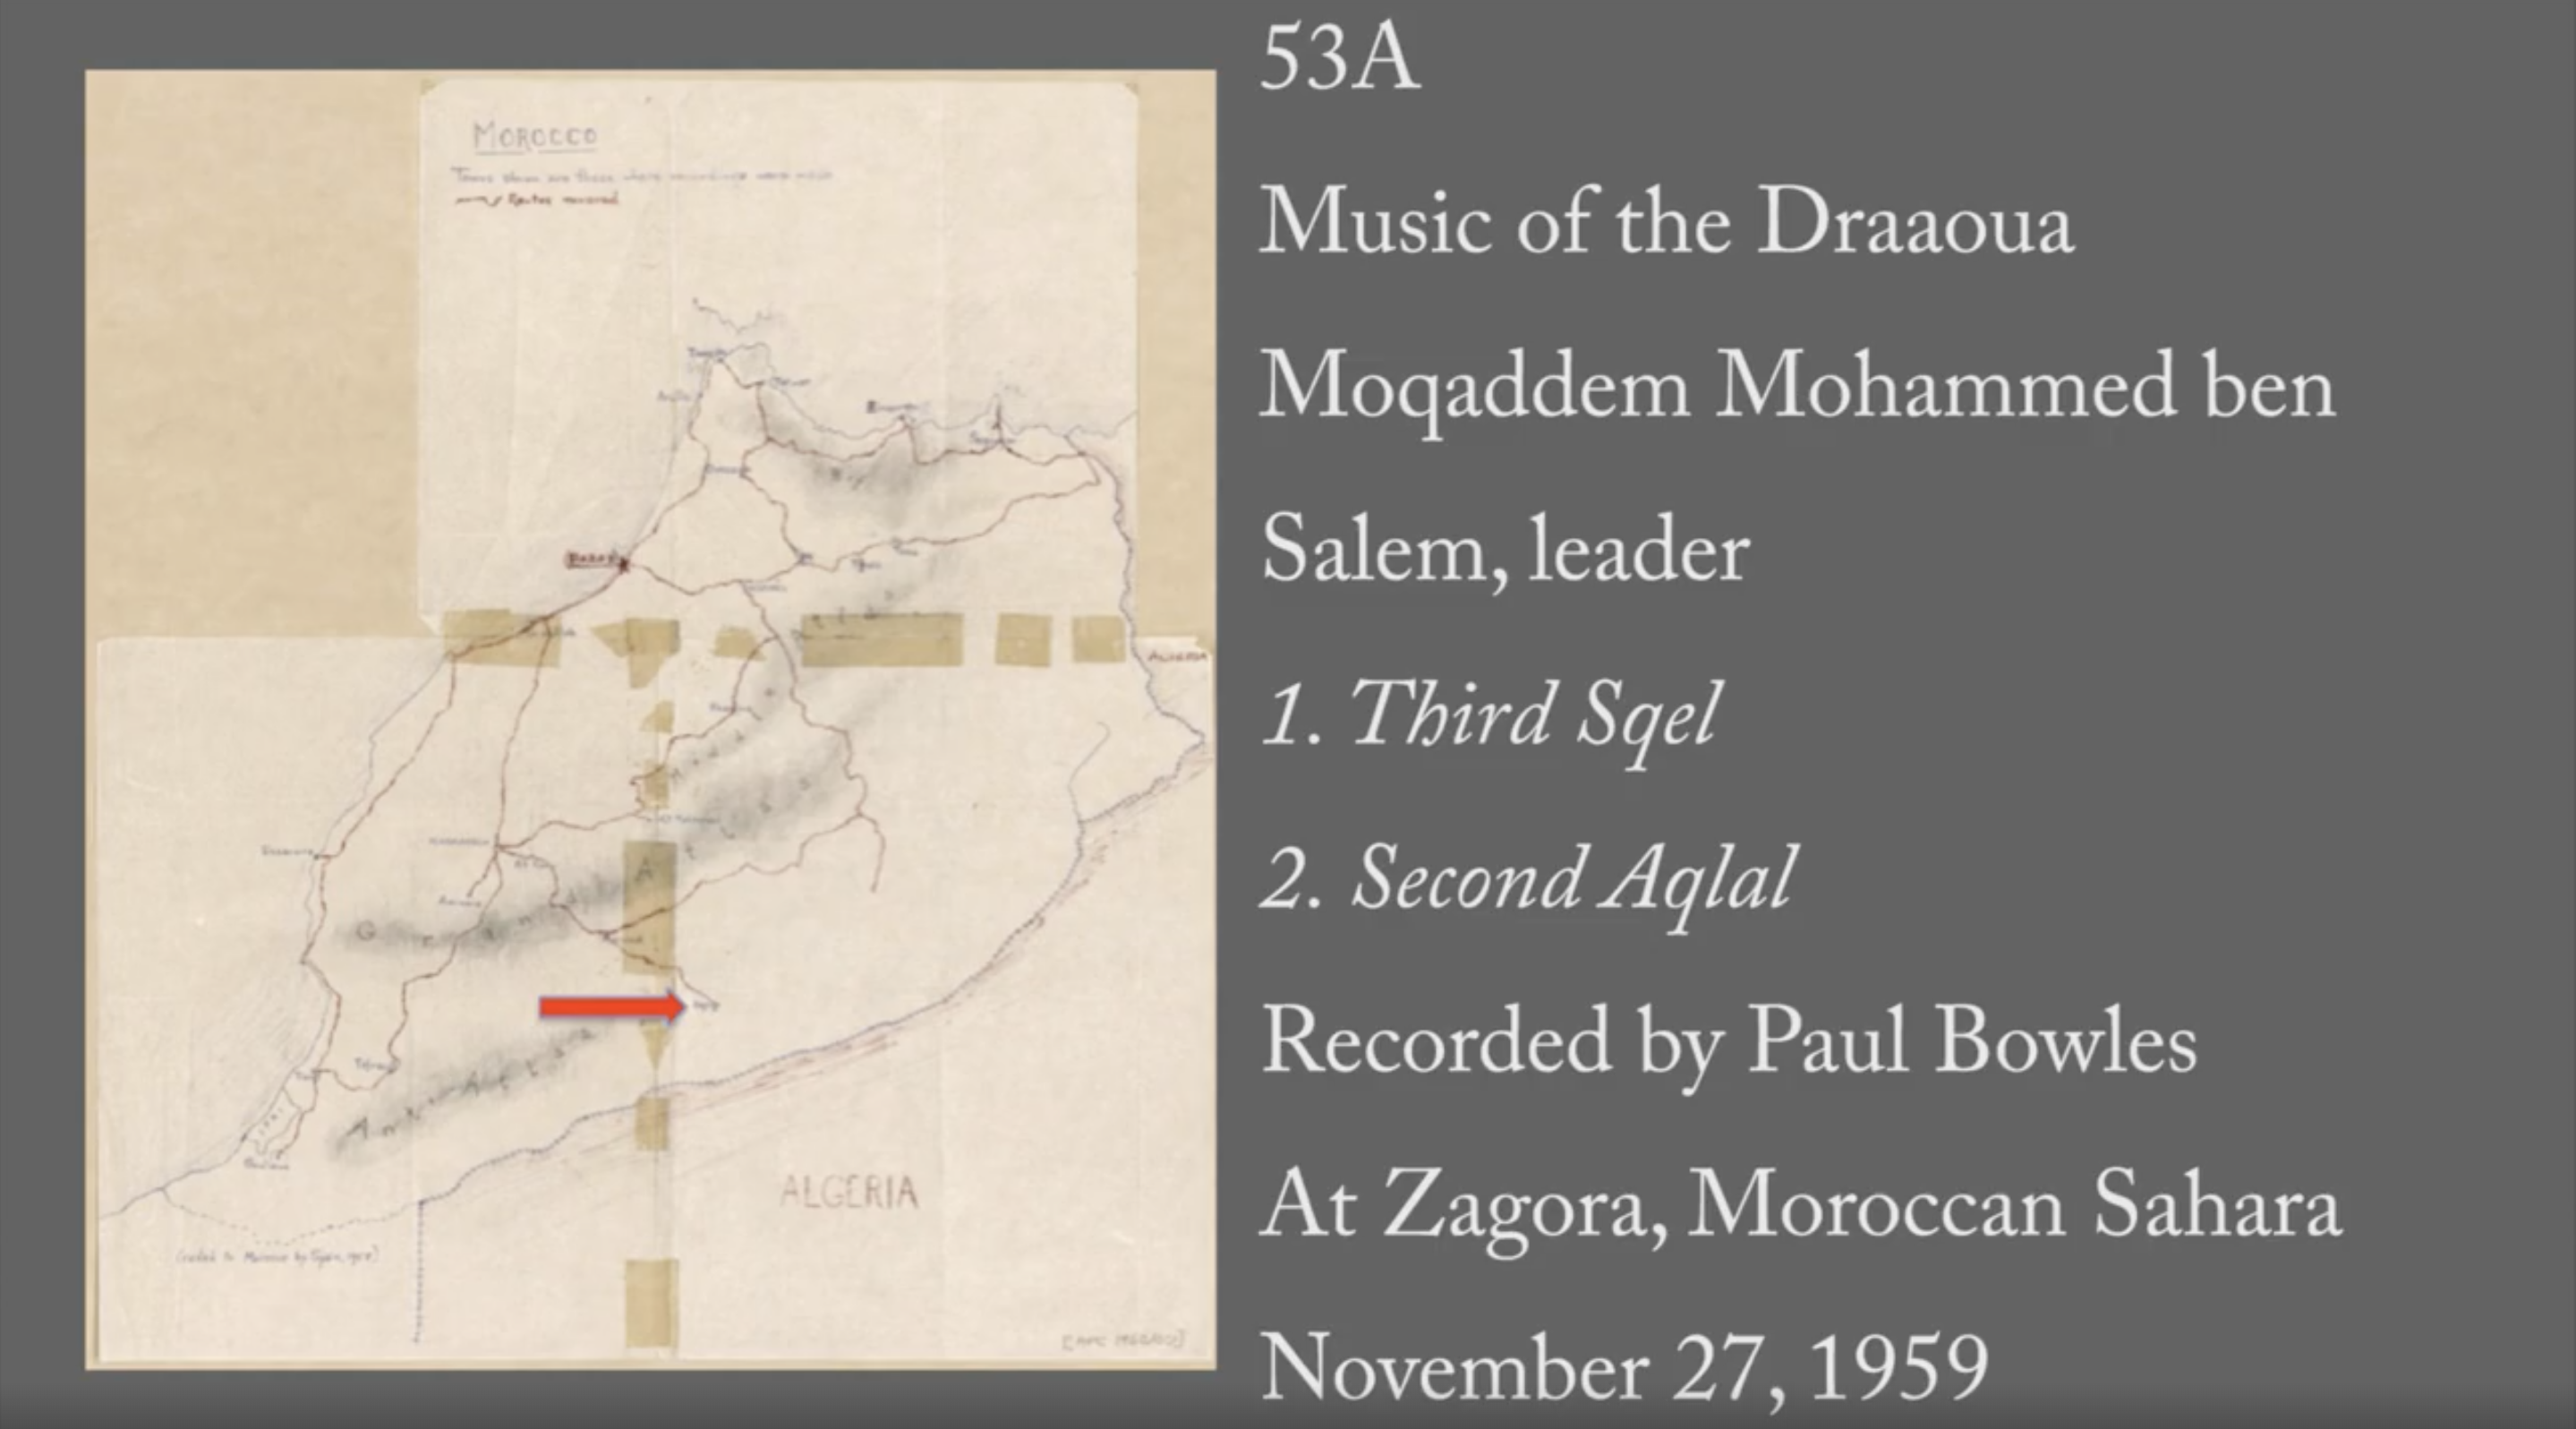  Zagora - 53A: "Third Sqel and Second Aqlal" (Music of the Draaoua)